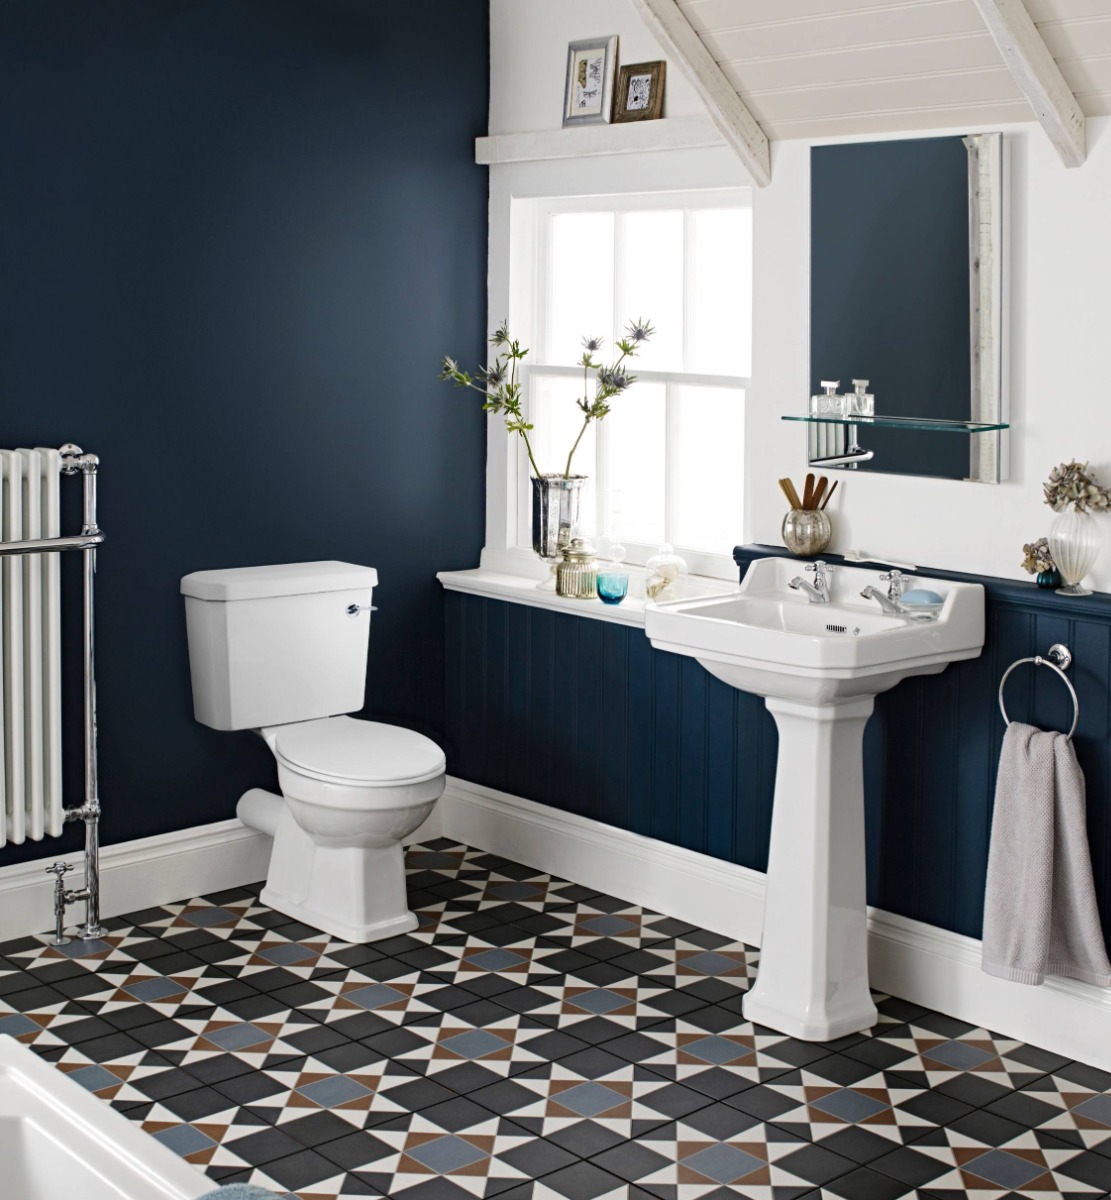 Classic blue bathroom with patterned floor